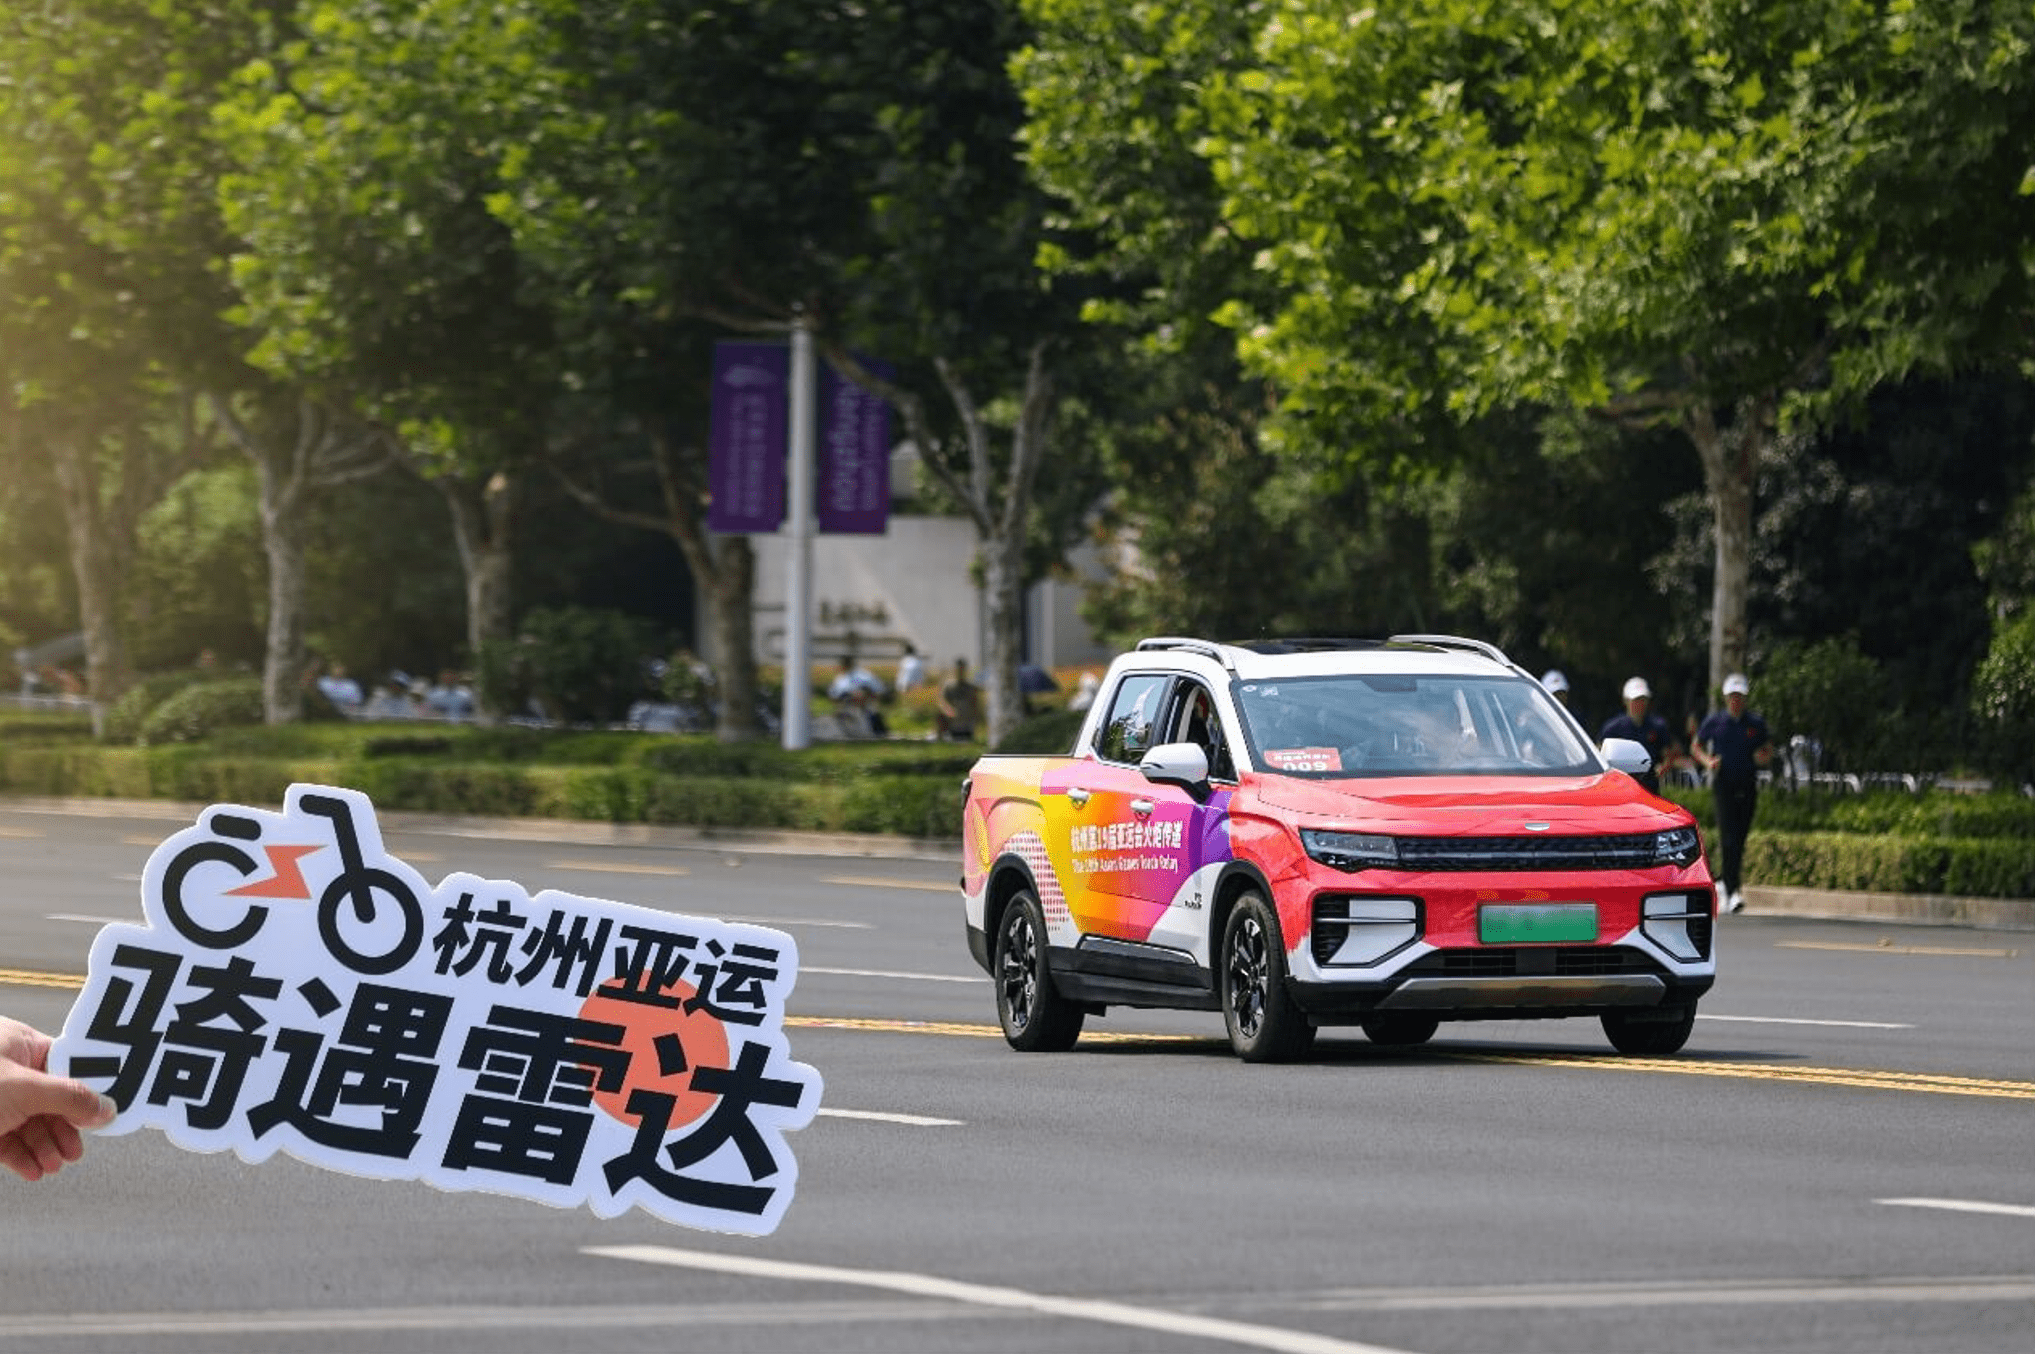 During the Asian Games, RIDDARA New Energy Automobile will provide the RIDDARA RD6 as the official designated outdoor event vehicle for the torch relay and other outdoor events.